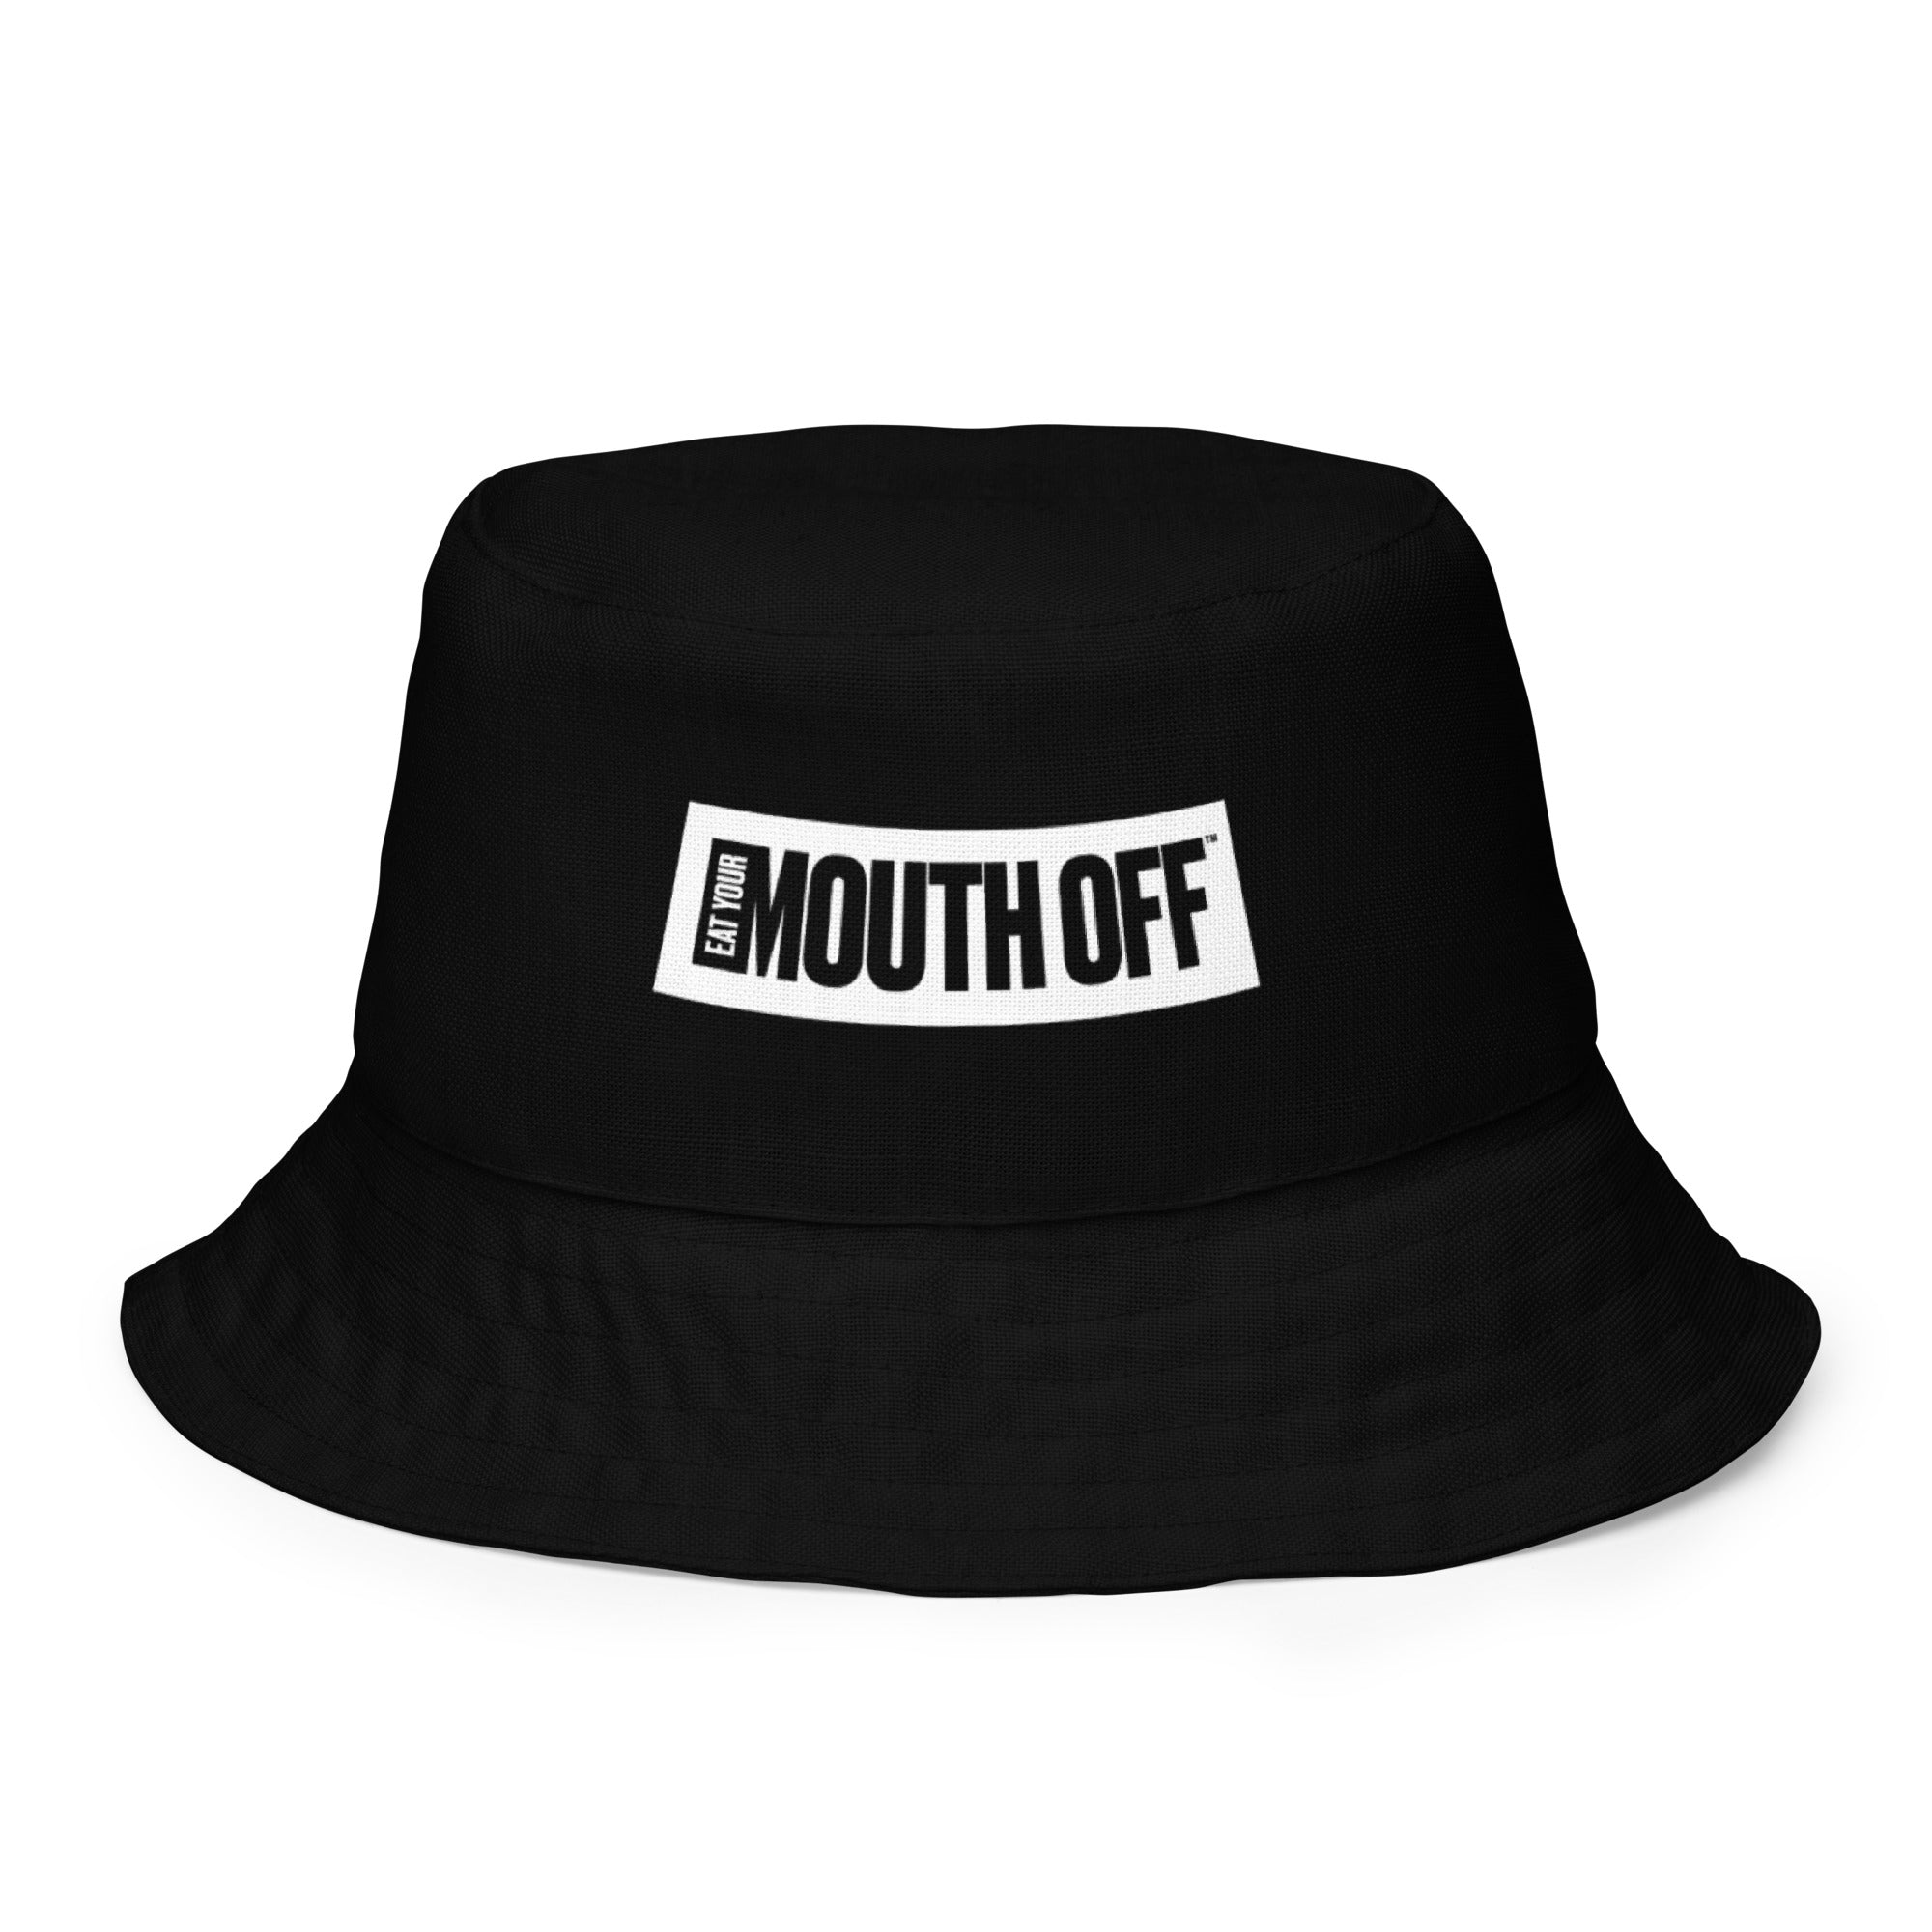 Eat Your Mouth Off™ Fruity Bucket Hat